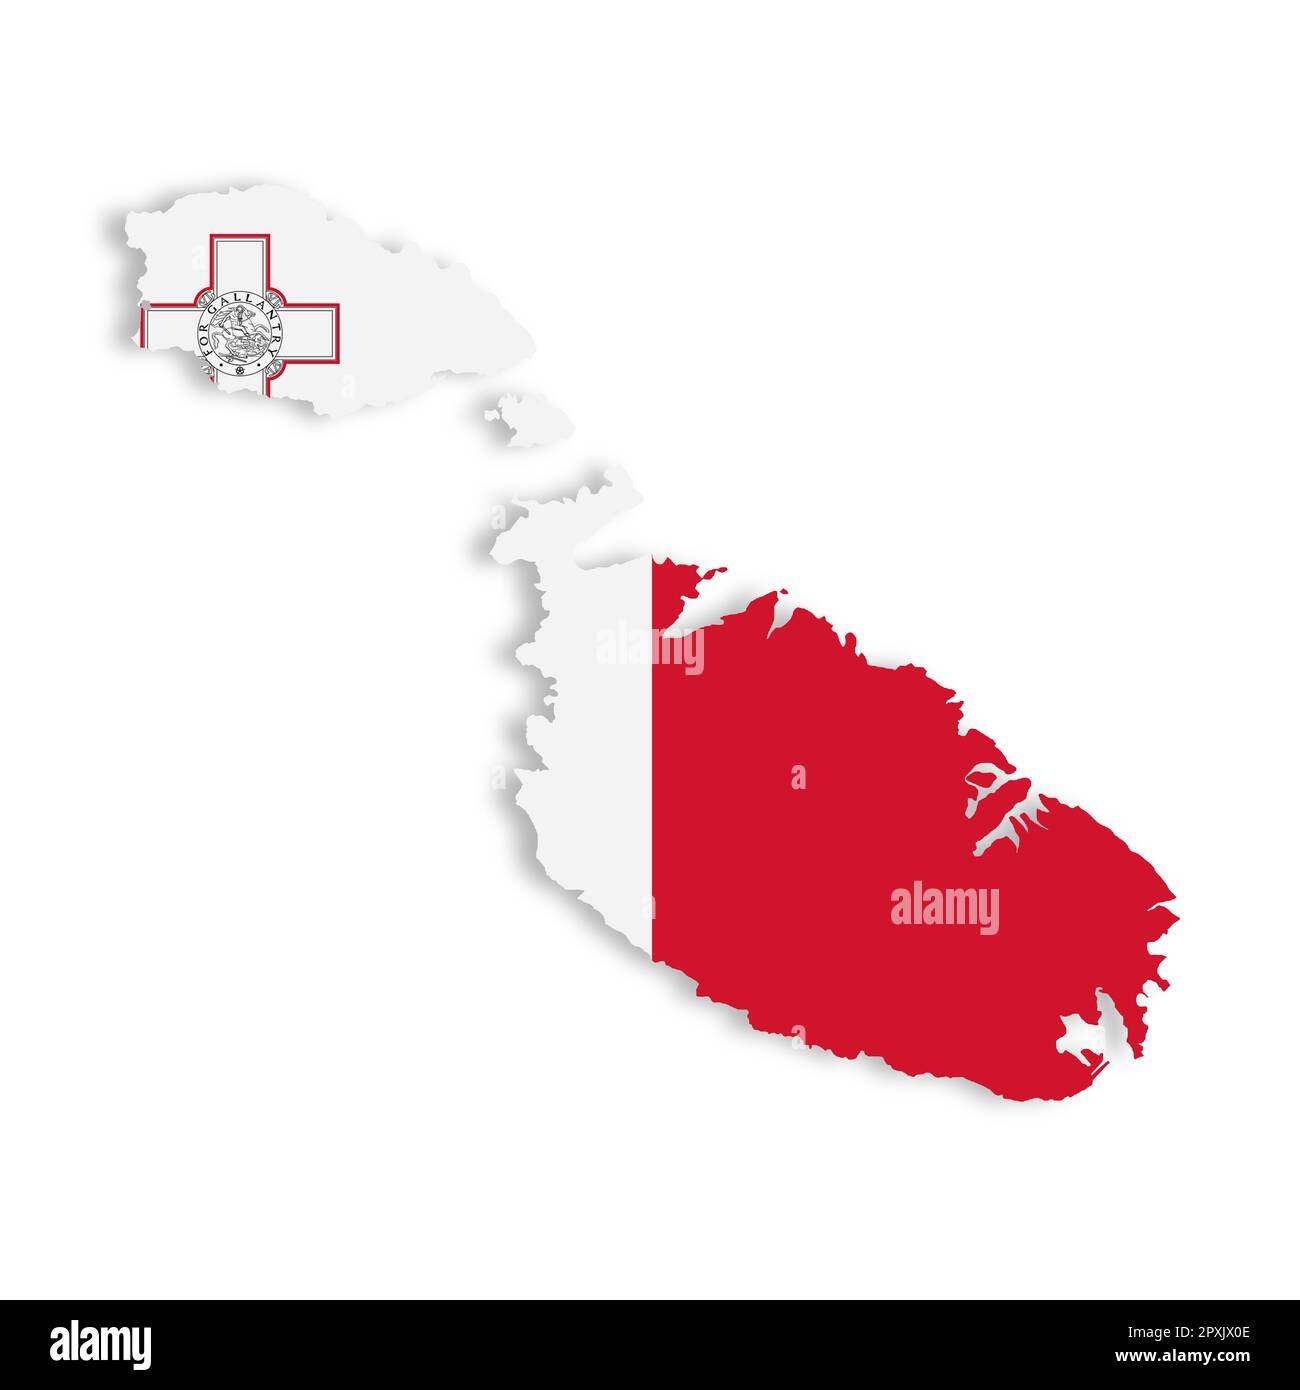 A Malta map on white background with clipping path 3d illustration Stock Photo